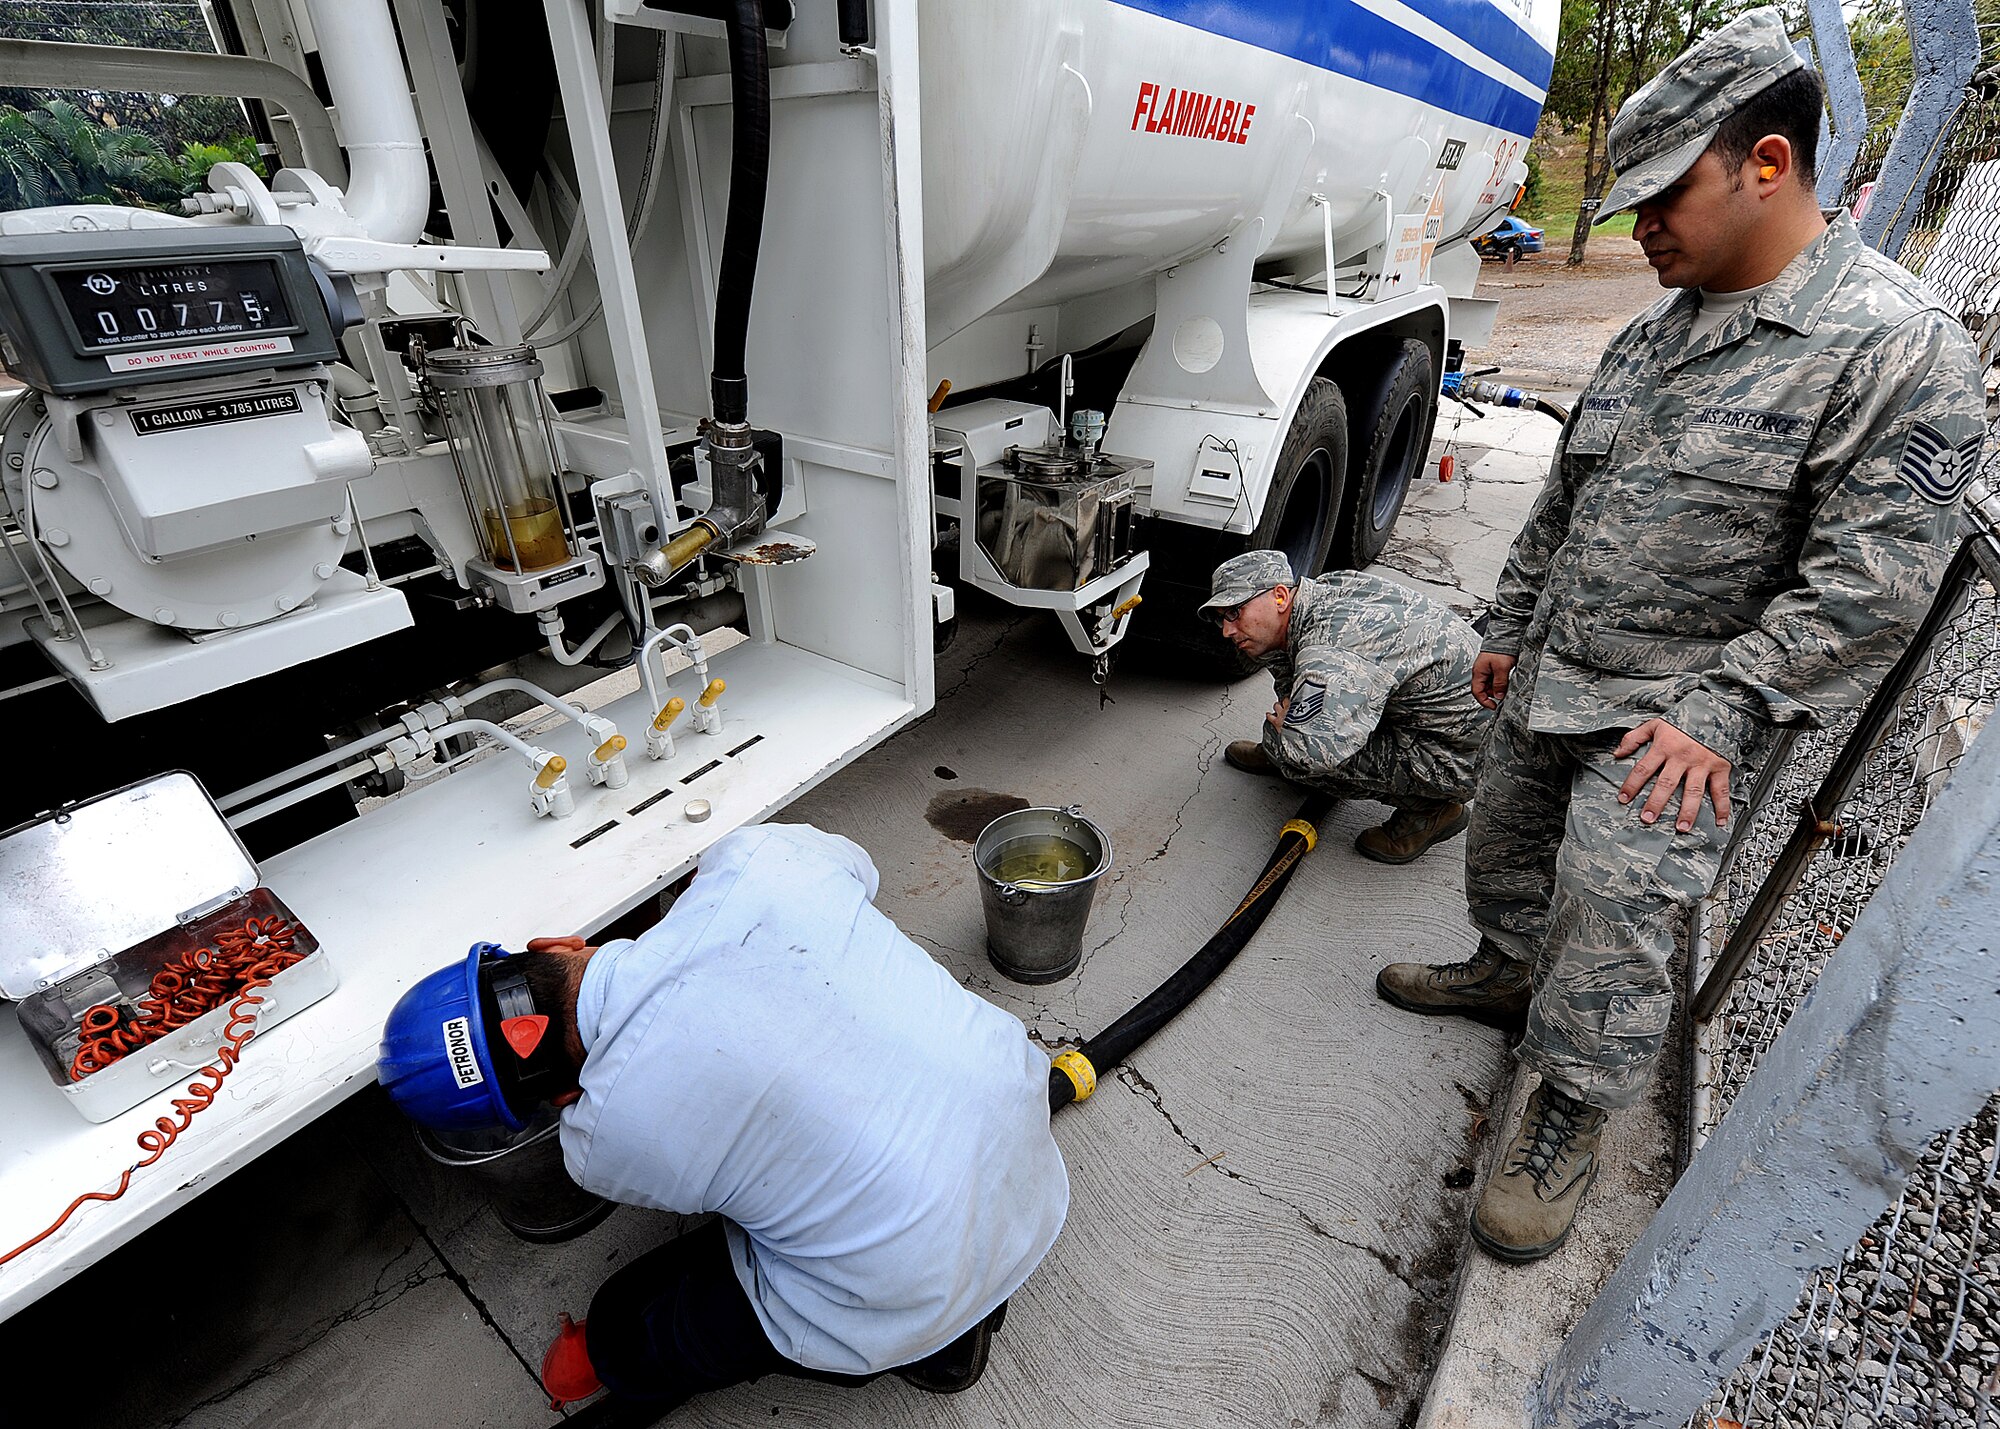 Master Sgt. Michael Raffa and Tech. Sgt. Filiberto Rodriguez, 571st Mobility Support Advisory Squadron fuels air advisors, look on as a Honduran contractor prepares the container for a fuel sample, in Tegucigalpa, Honduras, Feb. 13.  The MSAS Airmen, representing 15 Air Force specialties, are  working side-by-side with Honduran Air Force members in developing the seven core competencies of air base defense, air traffic control, aircraft maintenance, aircrew survival, communications, generator maintenance and safety.   (U.S. Air Force photo by Tech. Sgt. Lesley Waters)